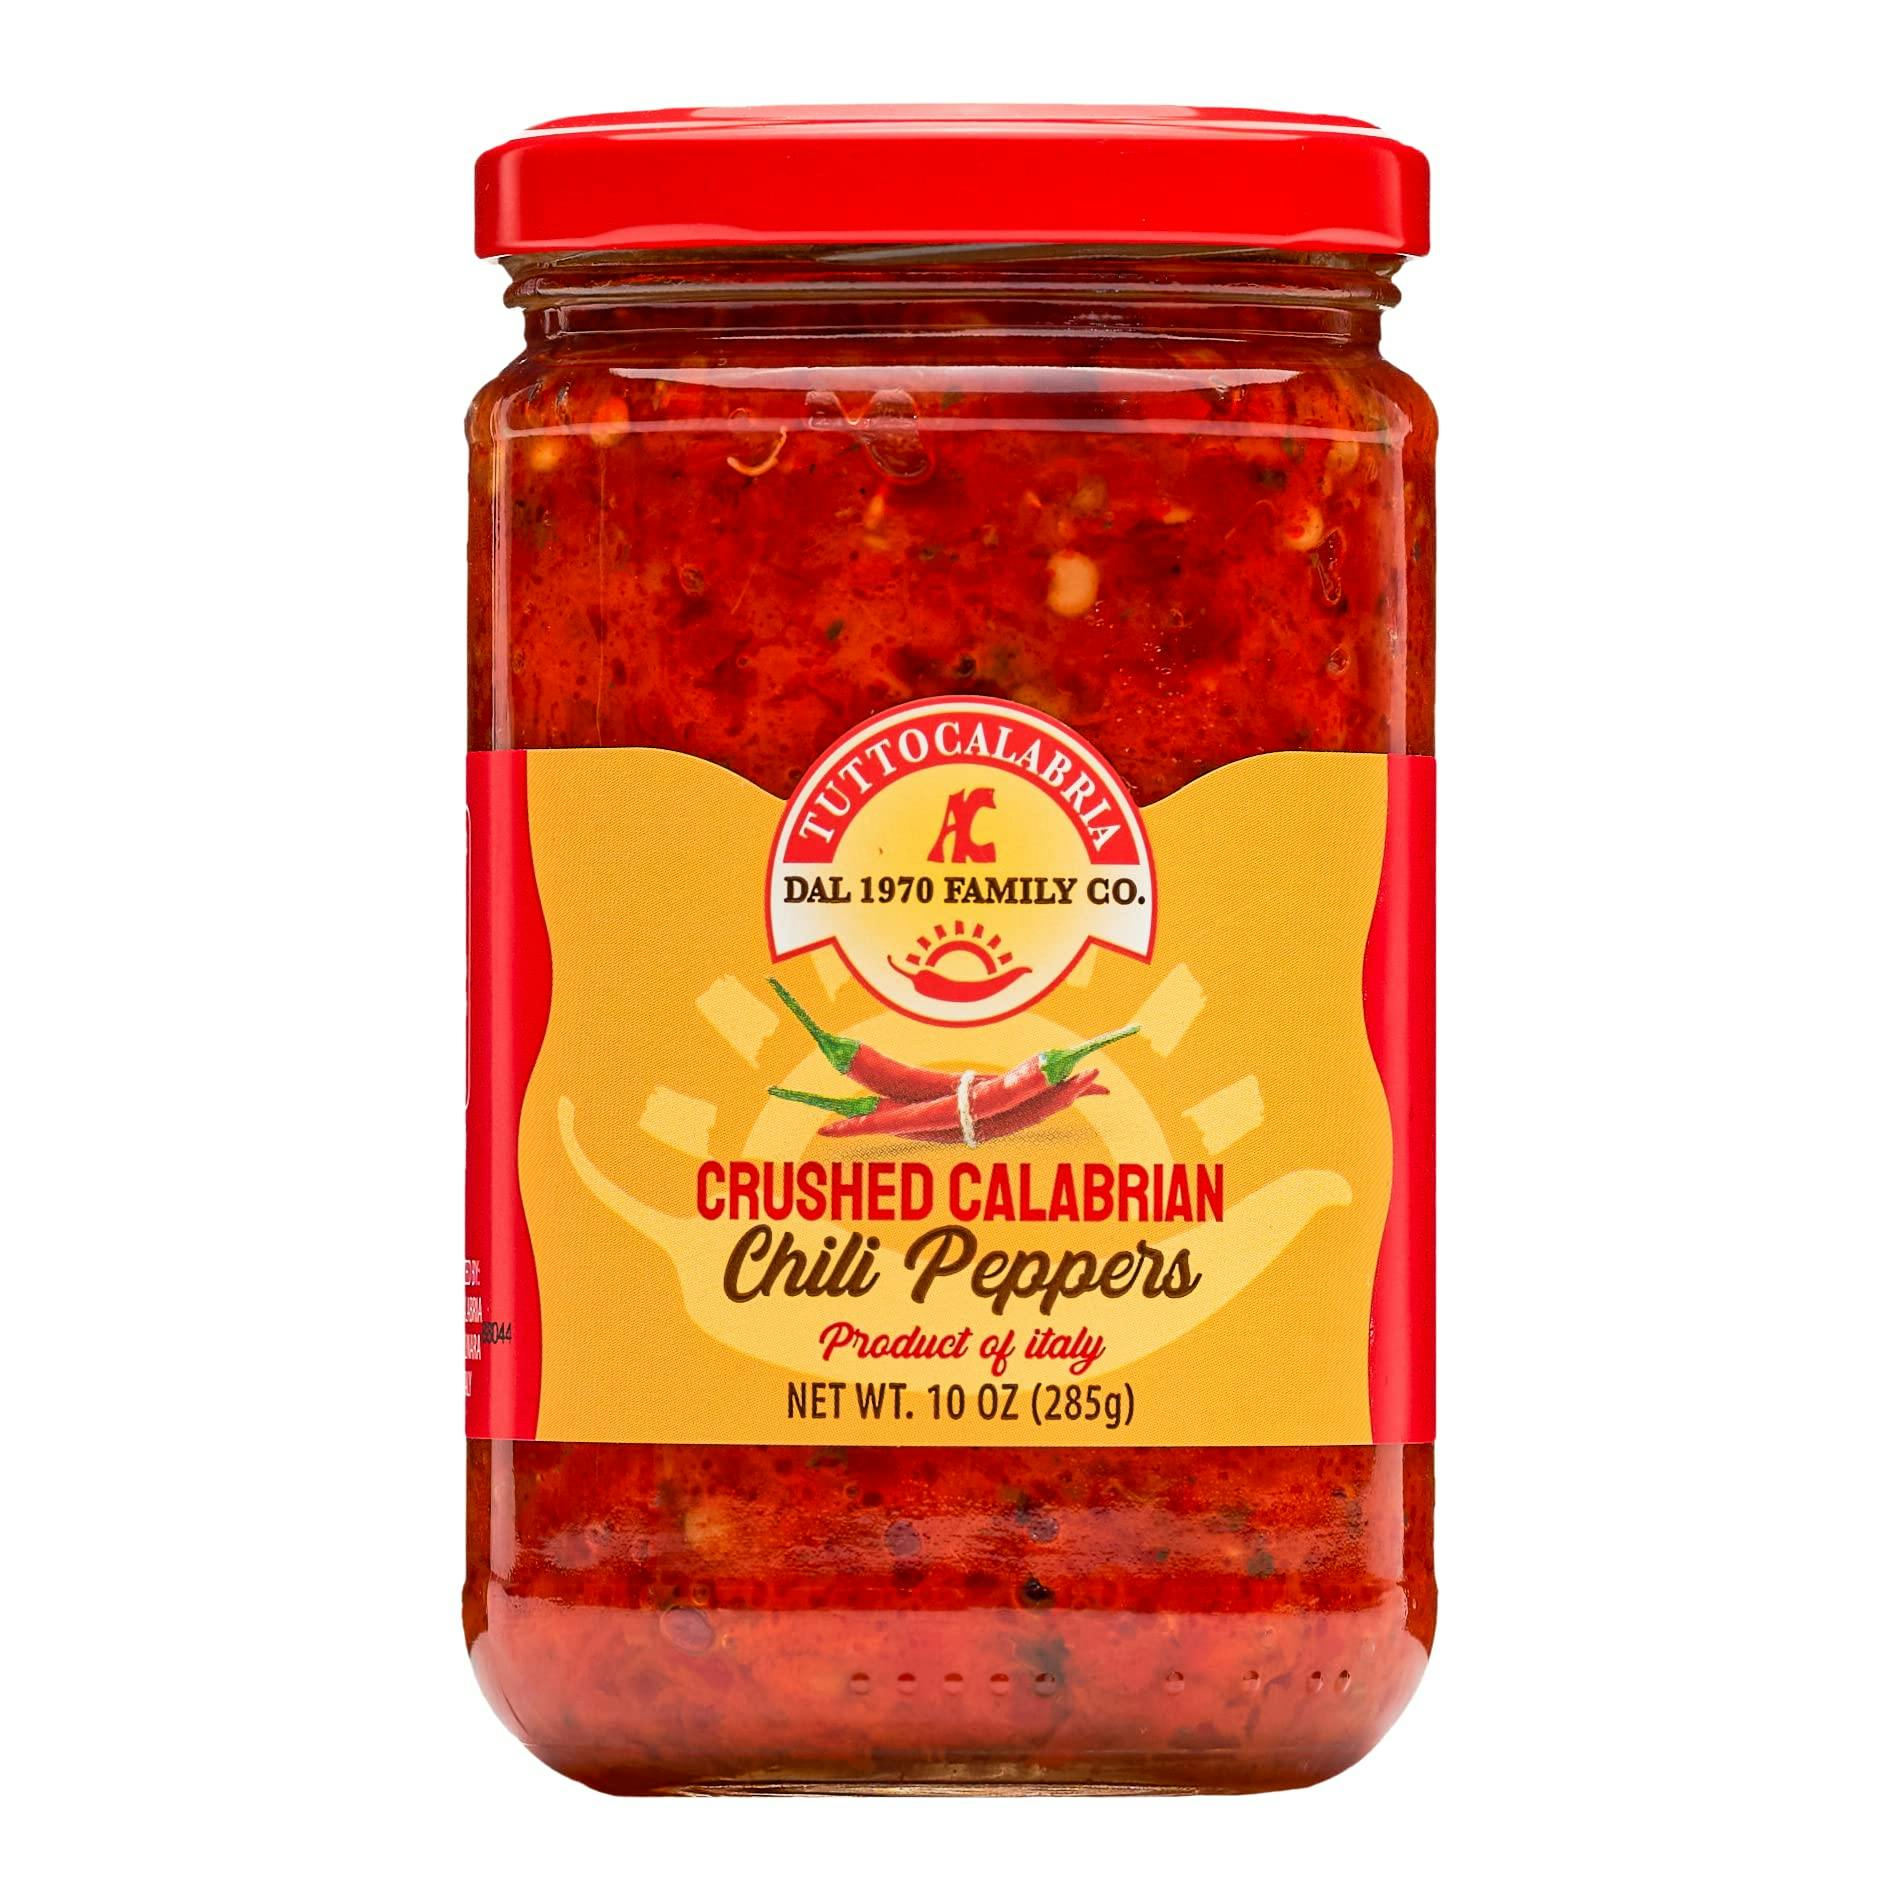 crushed Calabrian chilies